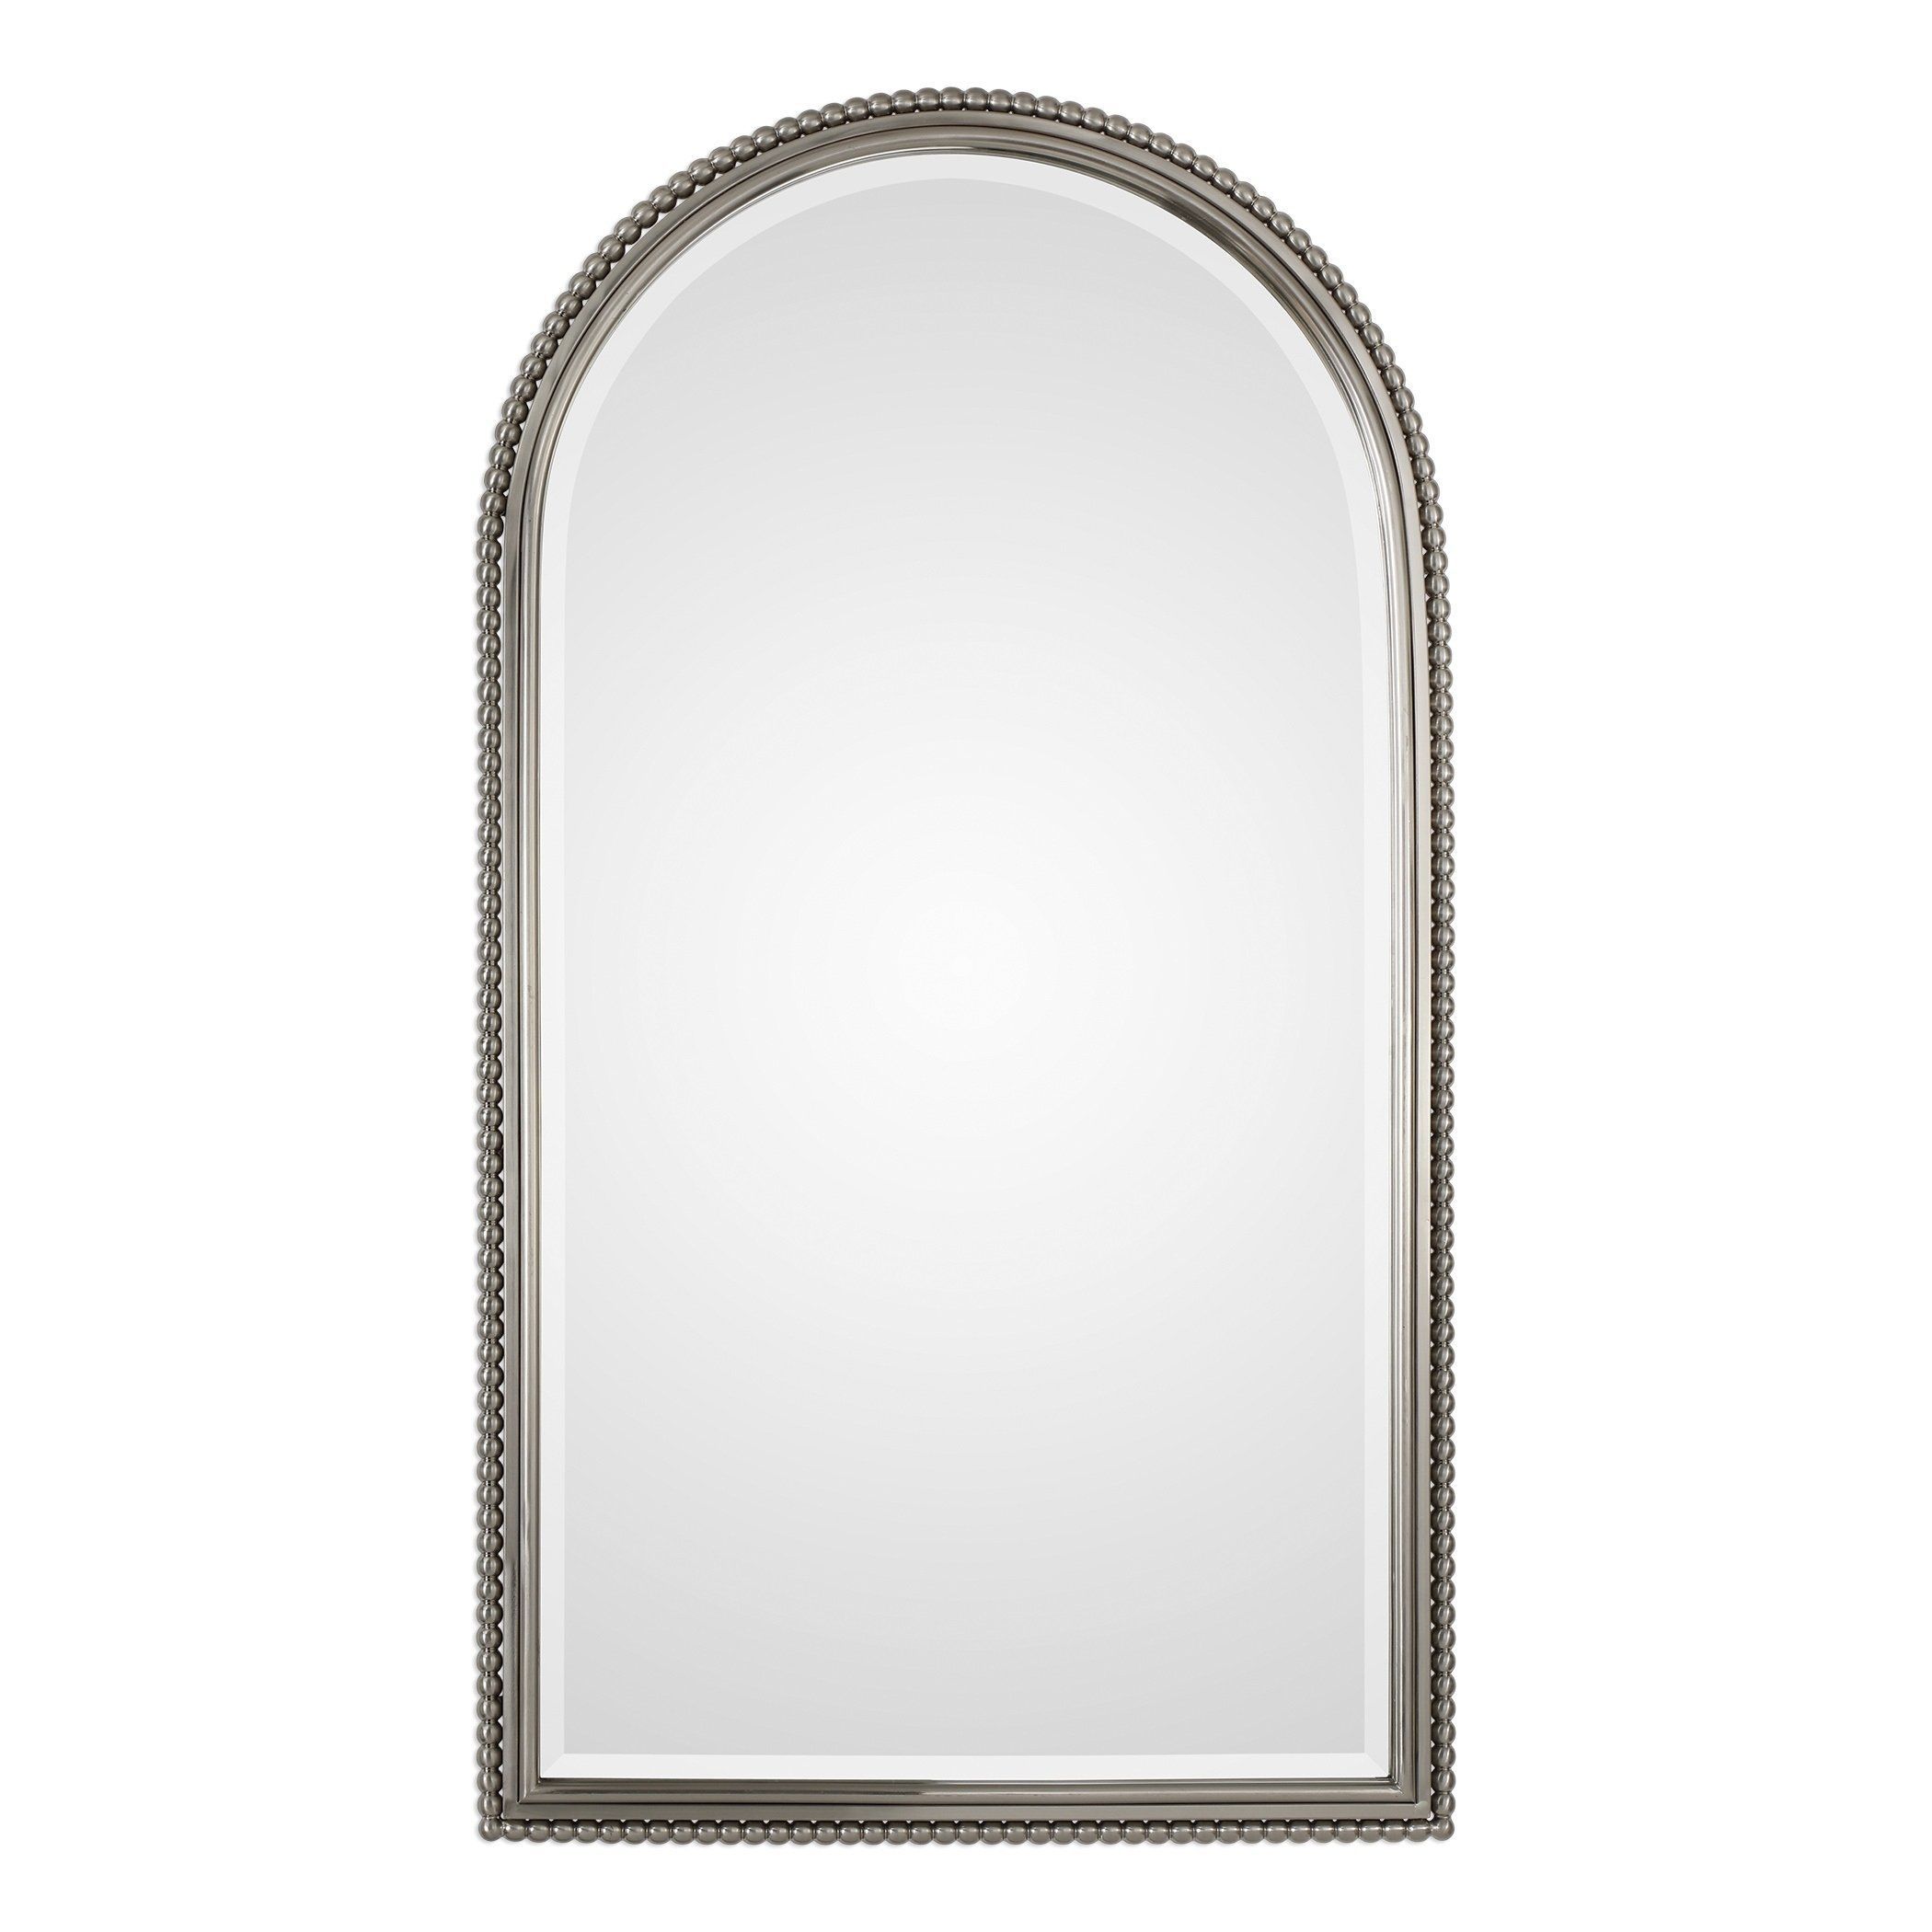 Uttermost Sherise Arch Plated Brushed Nickel Mirror | Arch Mirror With Regard To Brushed Nickel Octagon Mirrors (View 8 of 15)